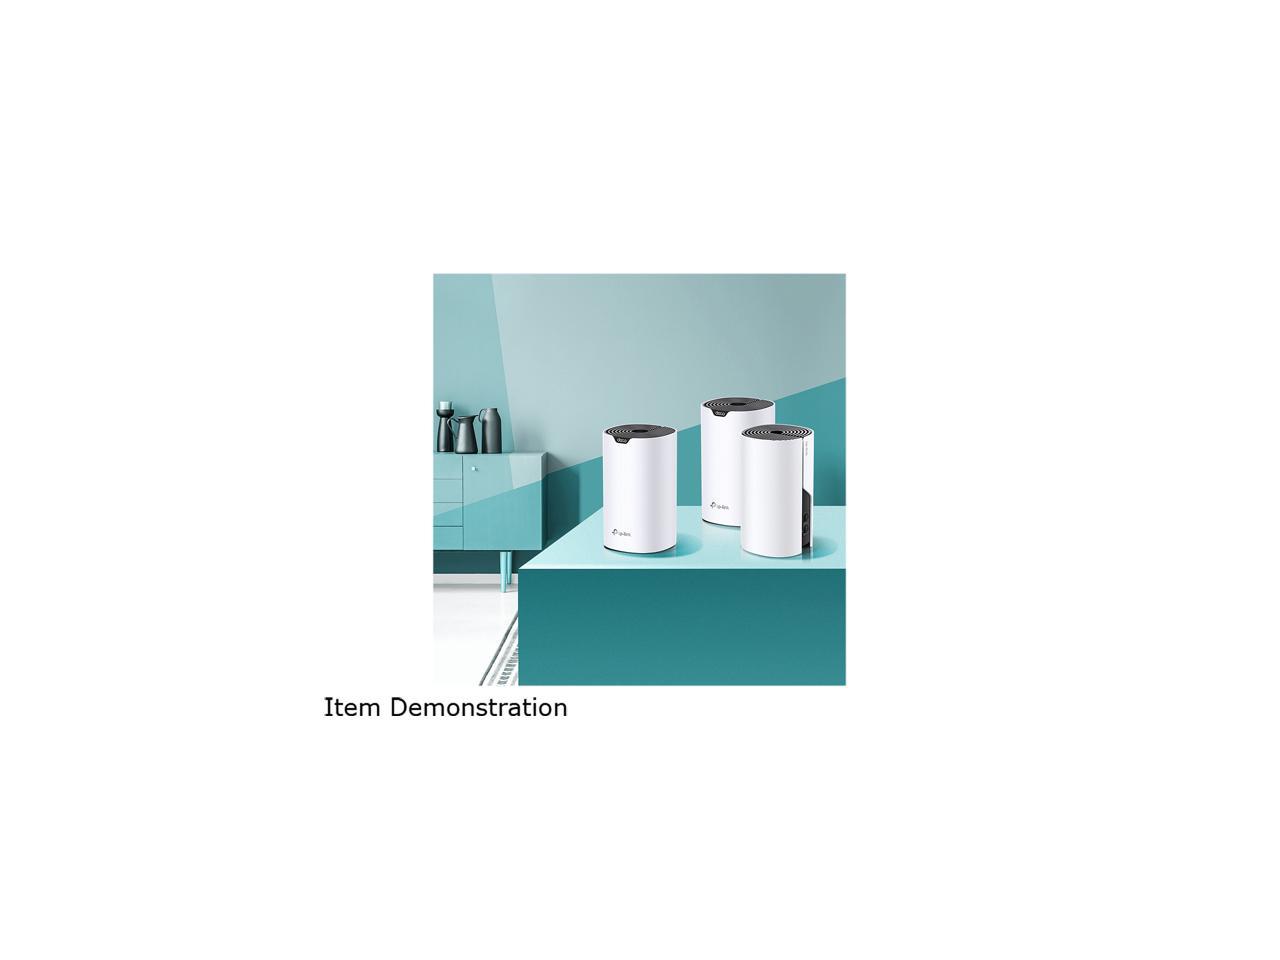 TP-LINK NT Deco S4(3-pack) AC1200 Whole Home Mesh Wi-Fi System